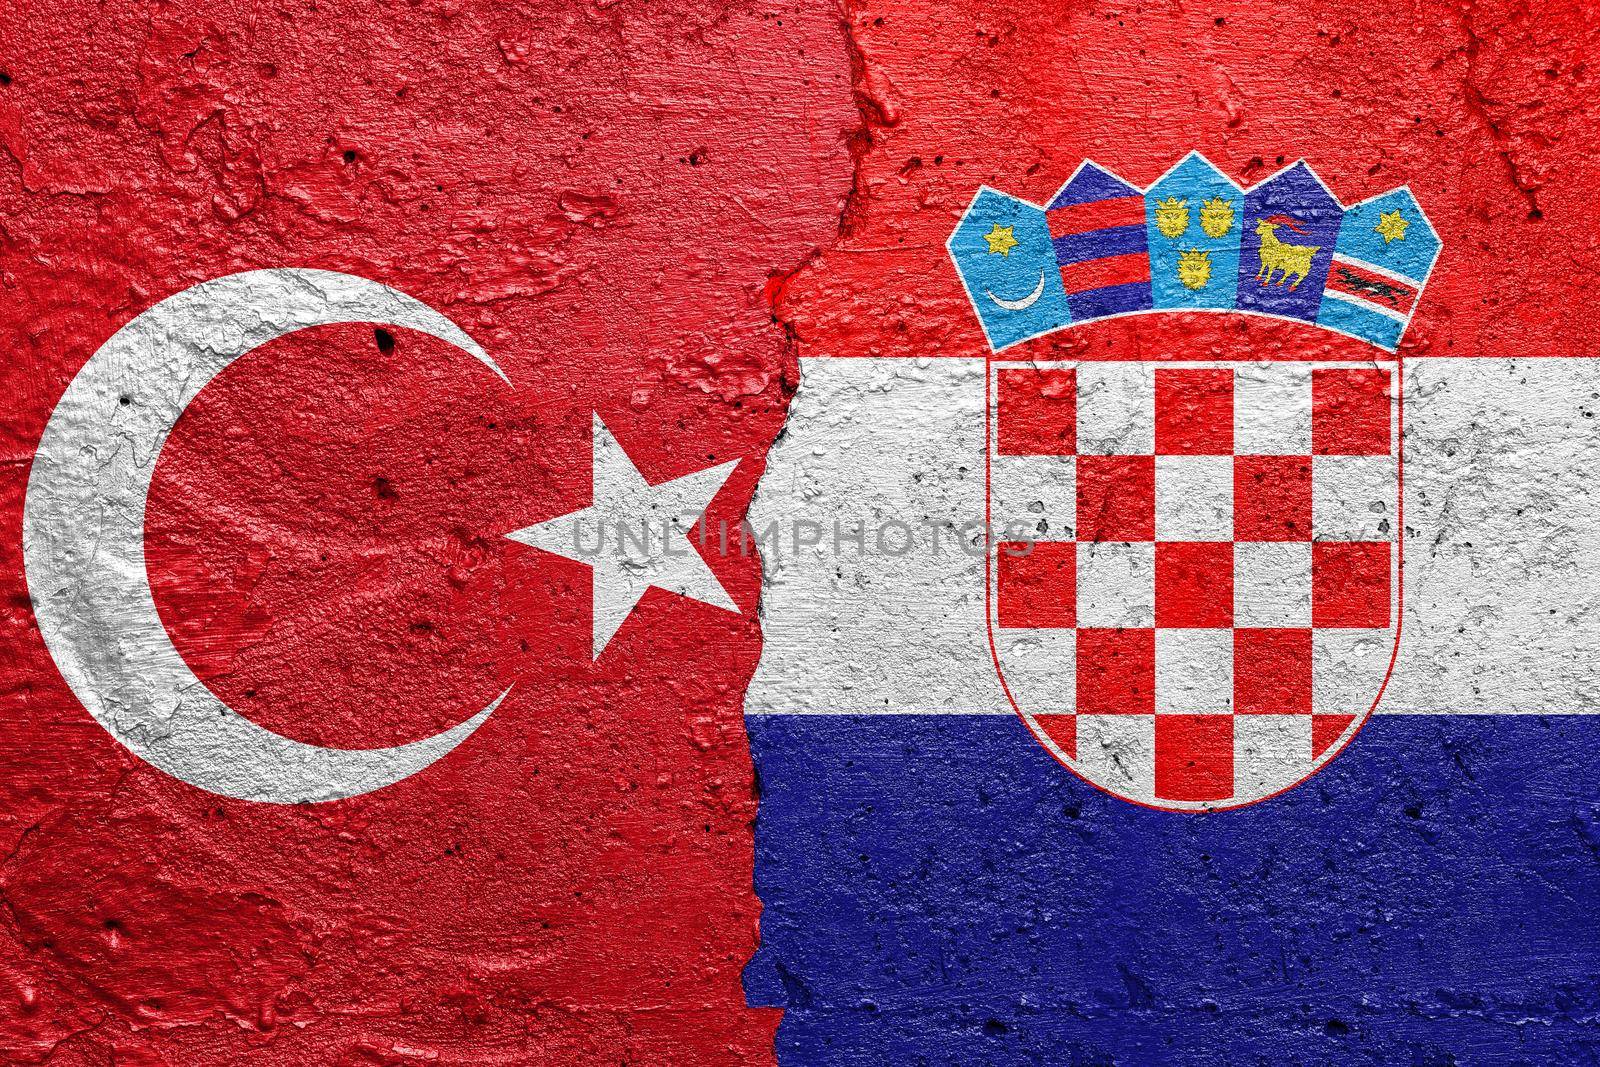 Turkey and Croatia - Cracked concrete wall painted with a Turkish flag on the left and a Croatian flag on the right